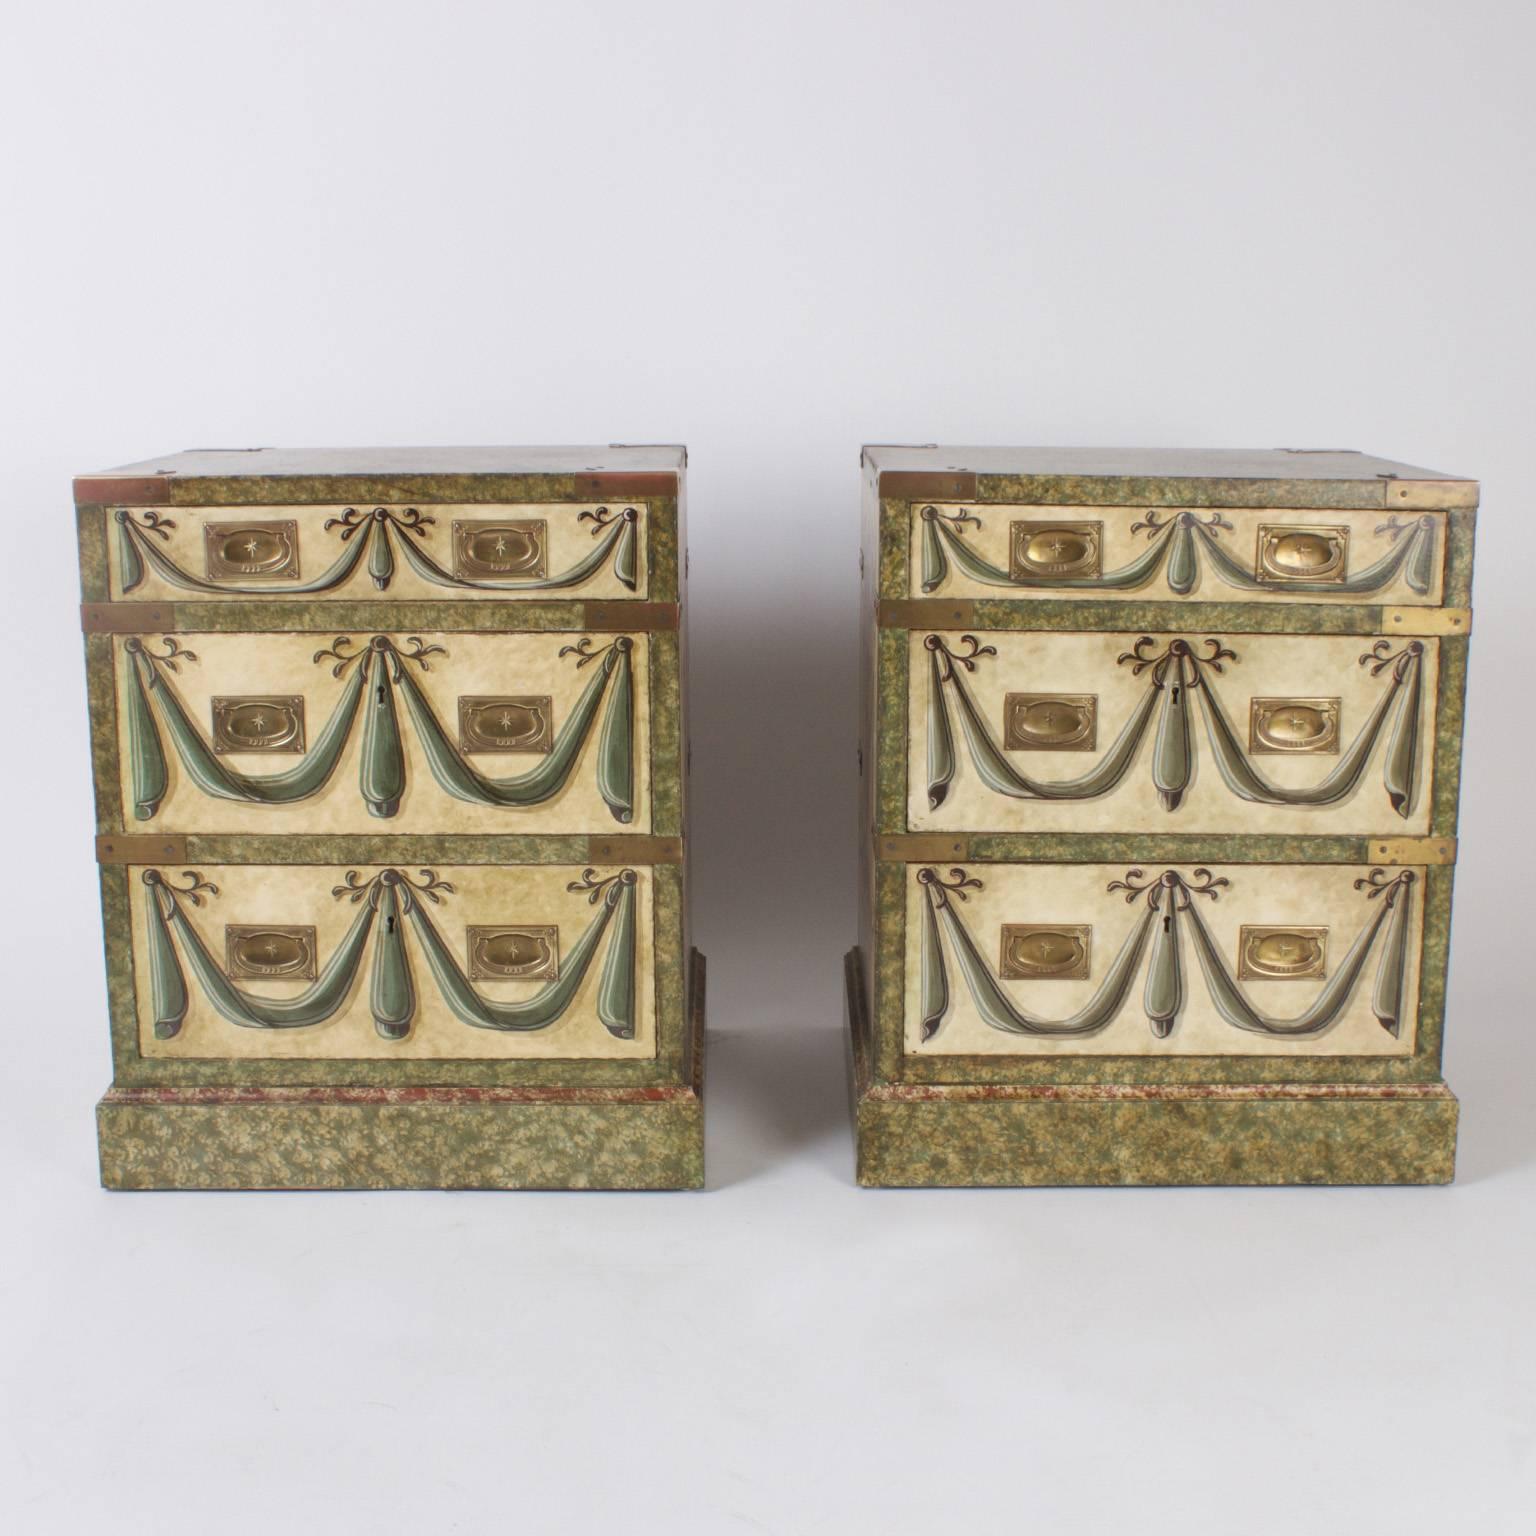 Pair of vintage three-drawer Campaign style nightstands or chests with trompe l'oeil style hand painting swags, curtains and flowers. The form and hardware suggest Campaign, yet the overall ambiance is theatrical.
 